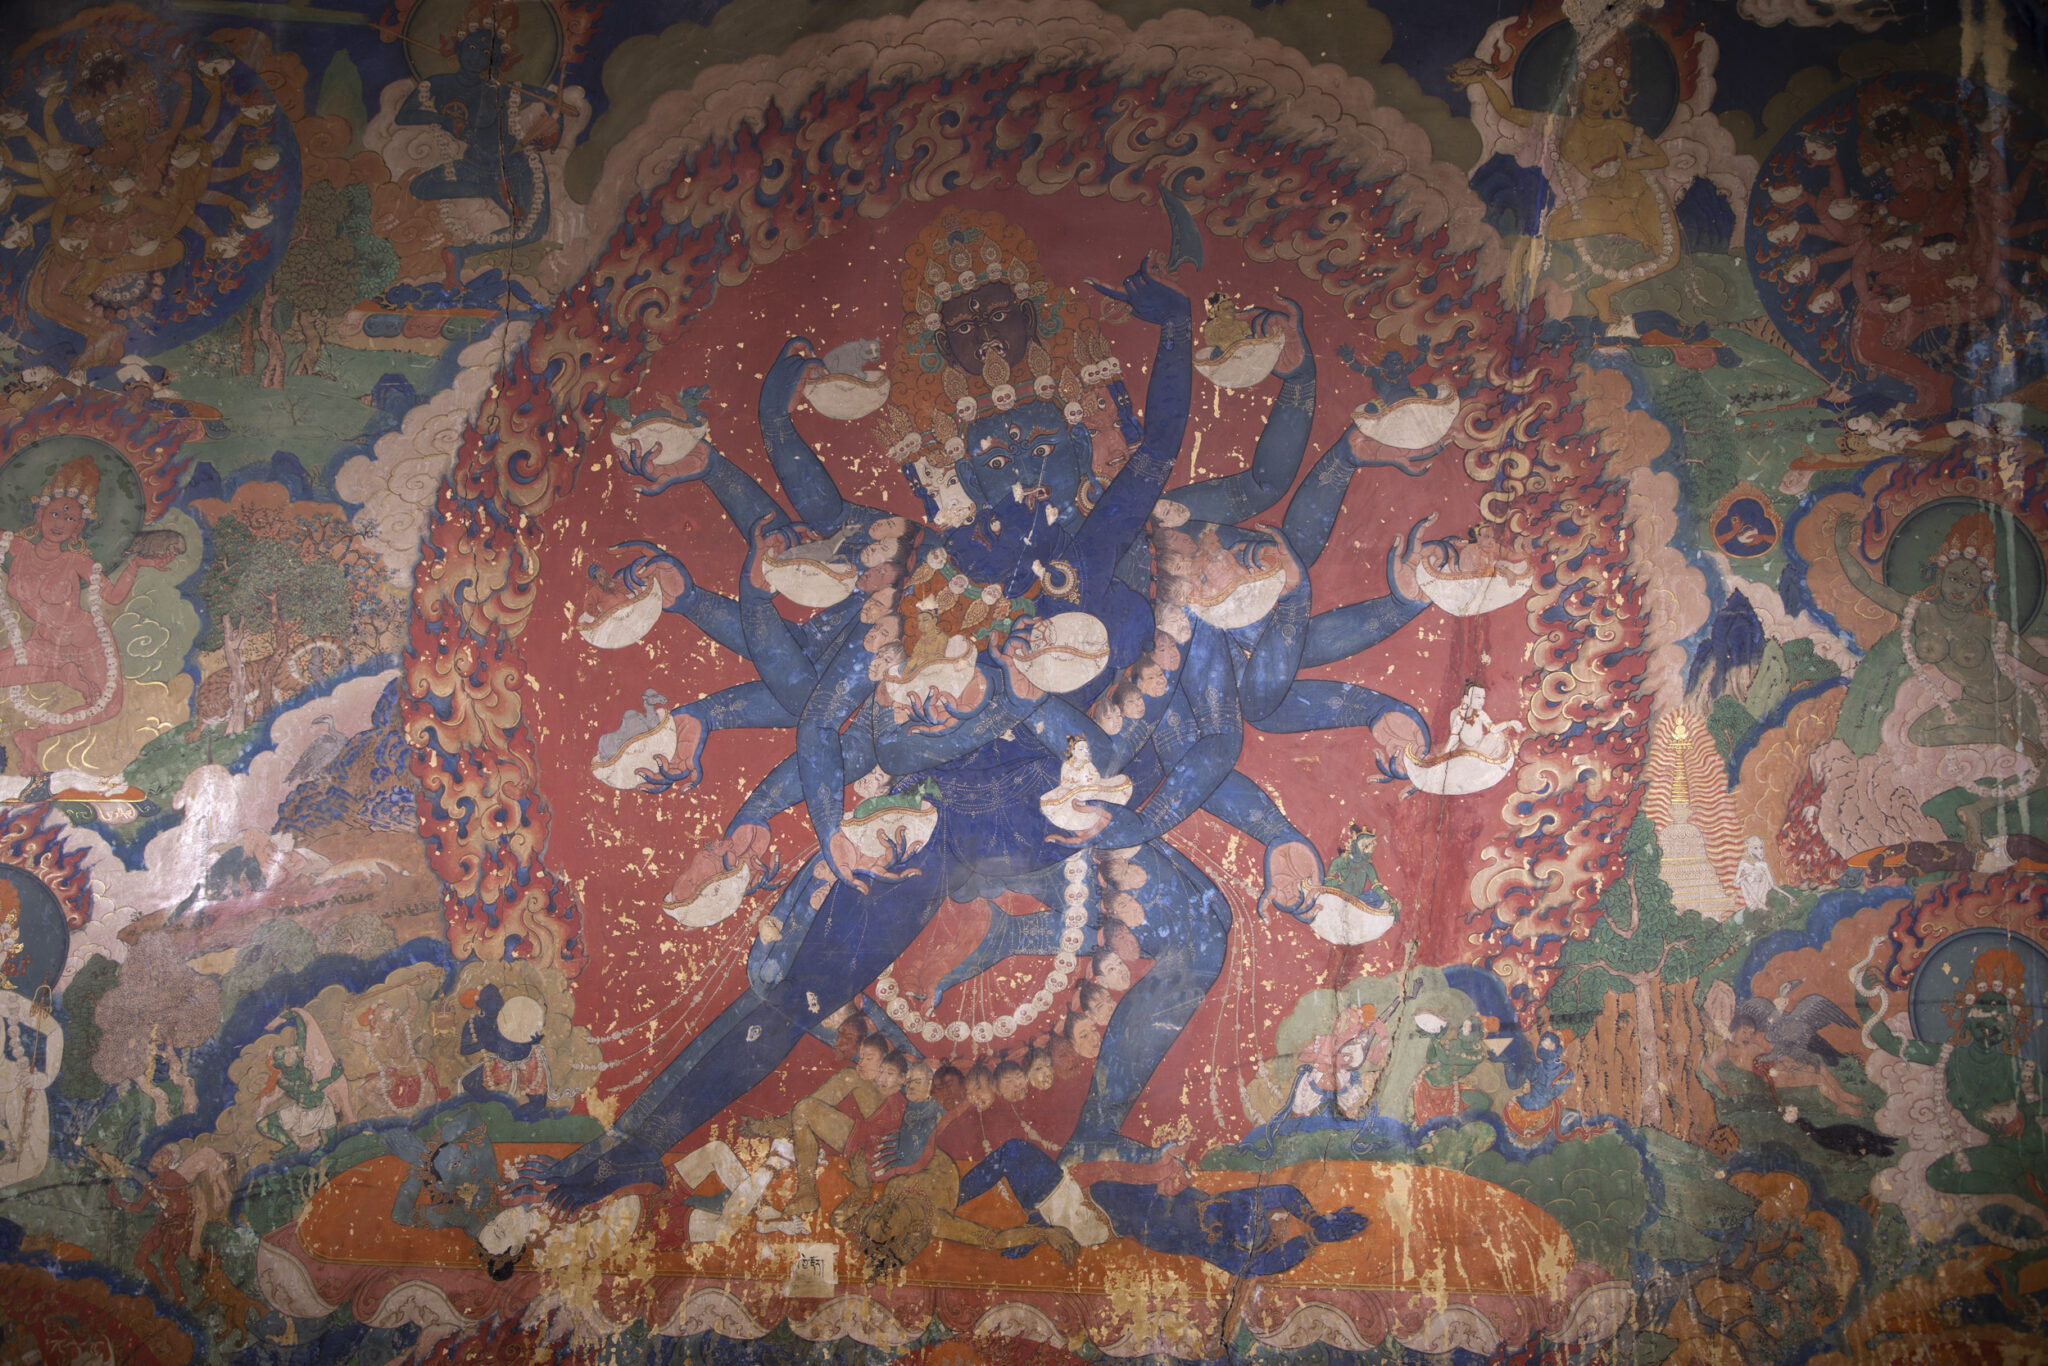 Two blue-skinned, many-armed deities holding implements, locked in embrace before fiery nimbus